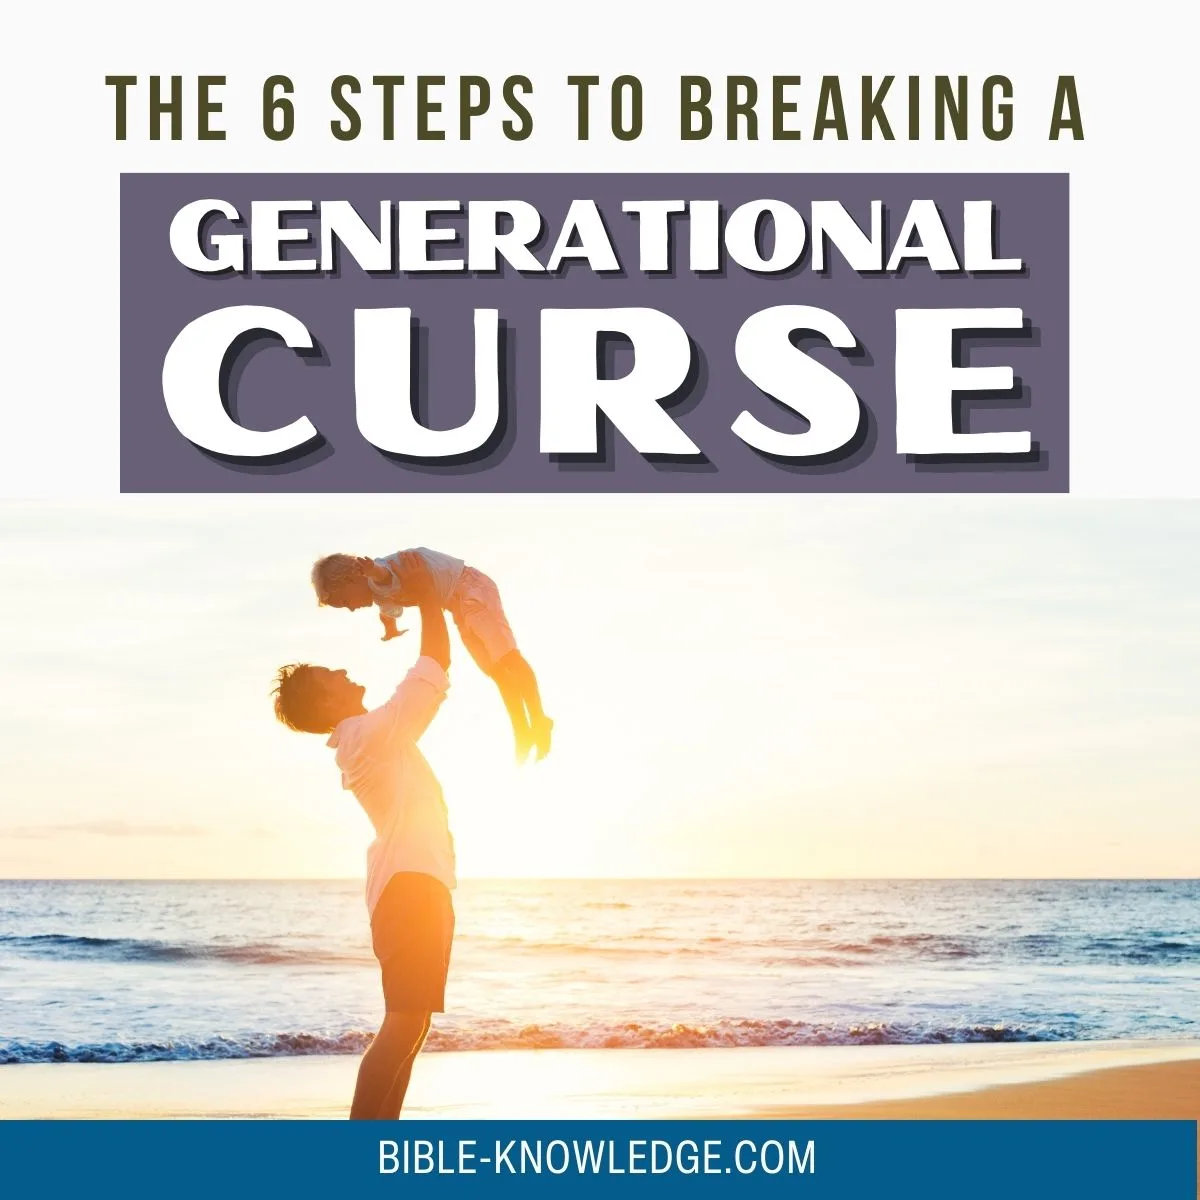 Prayer to break generational curses and release blessings